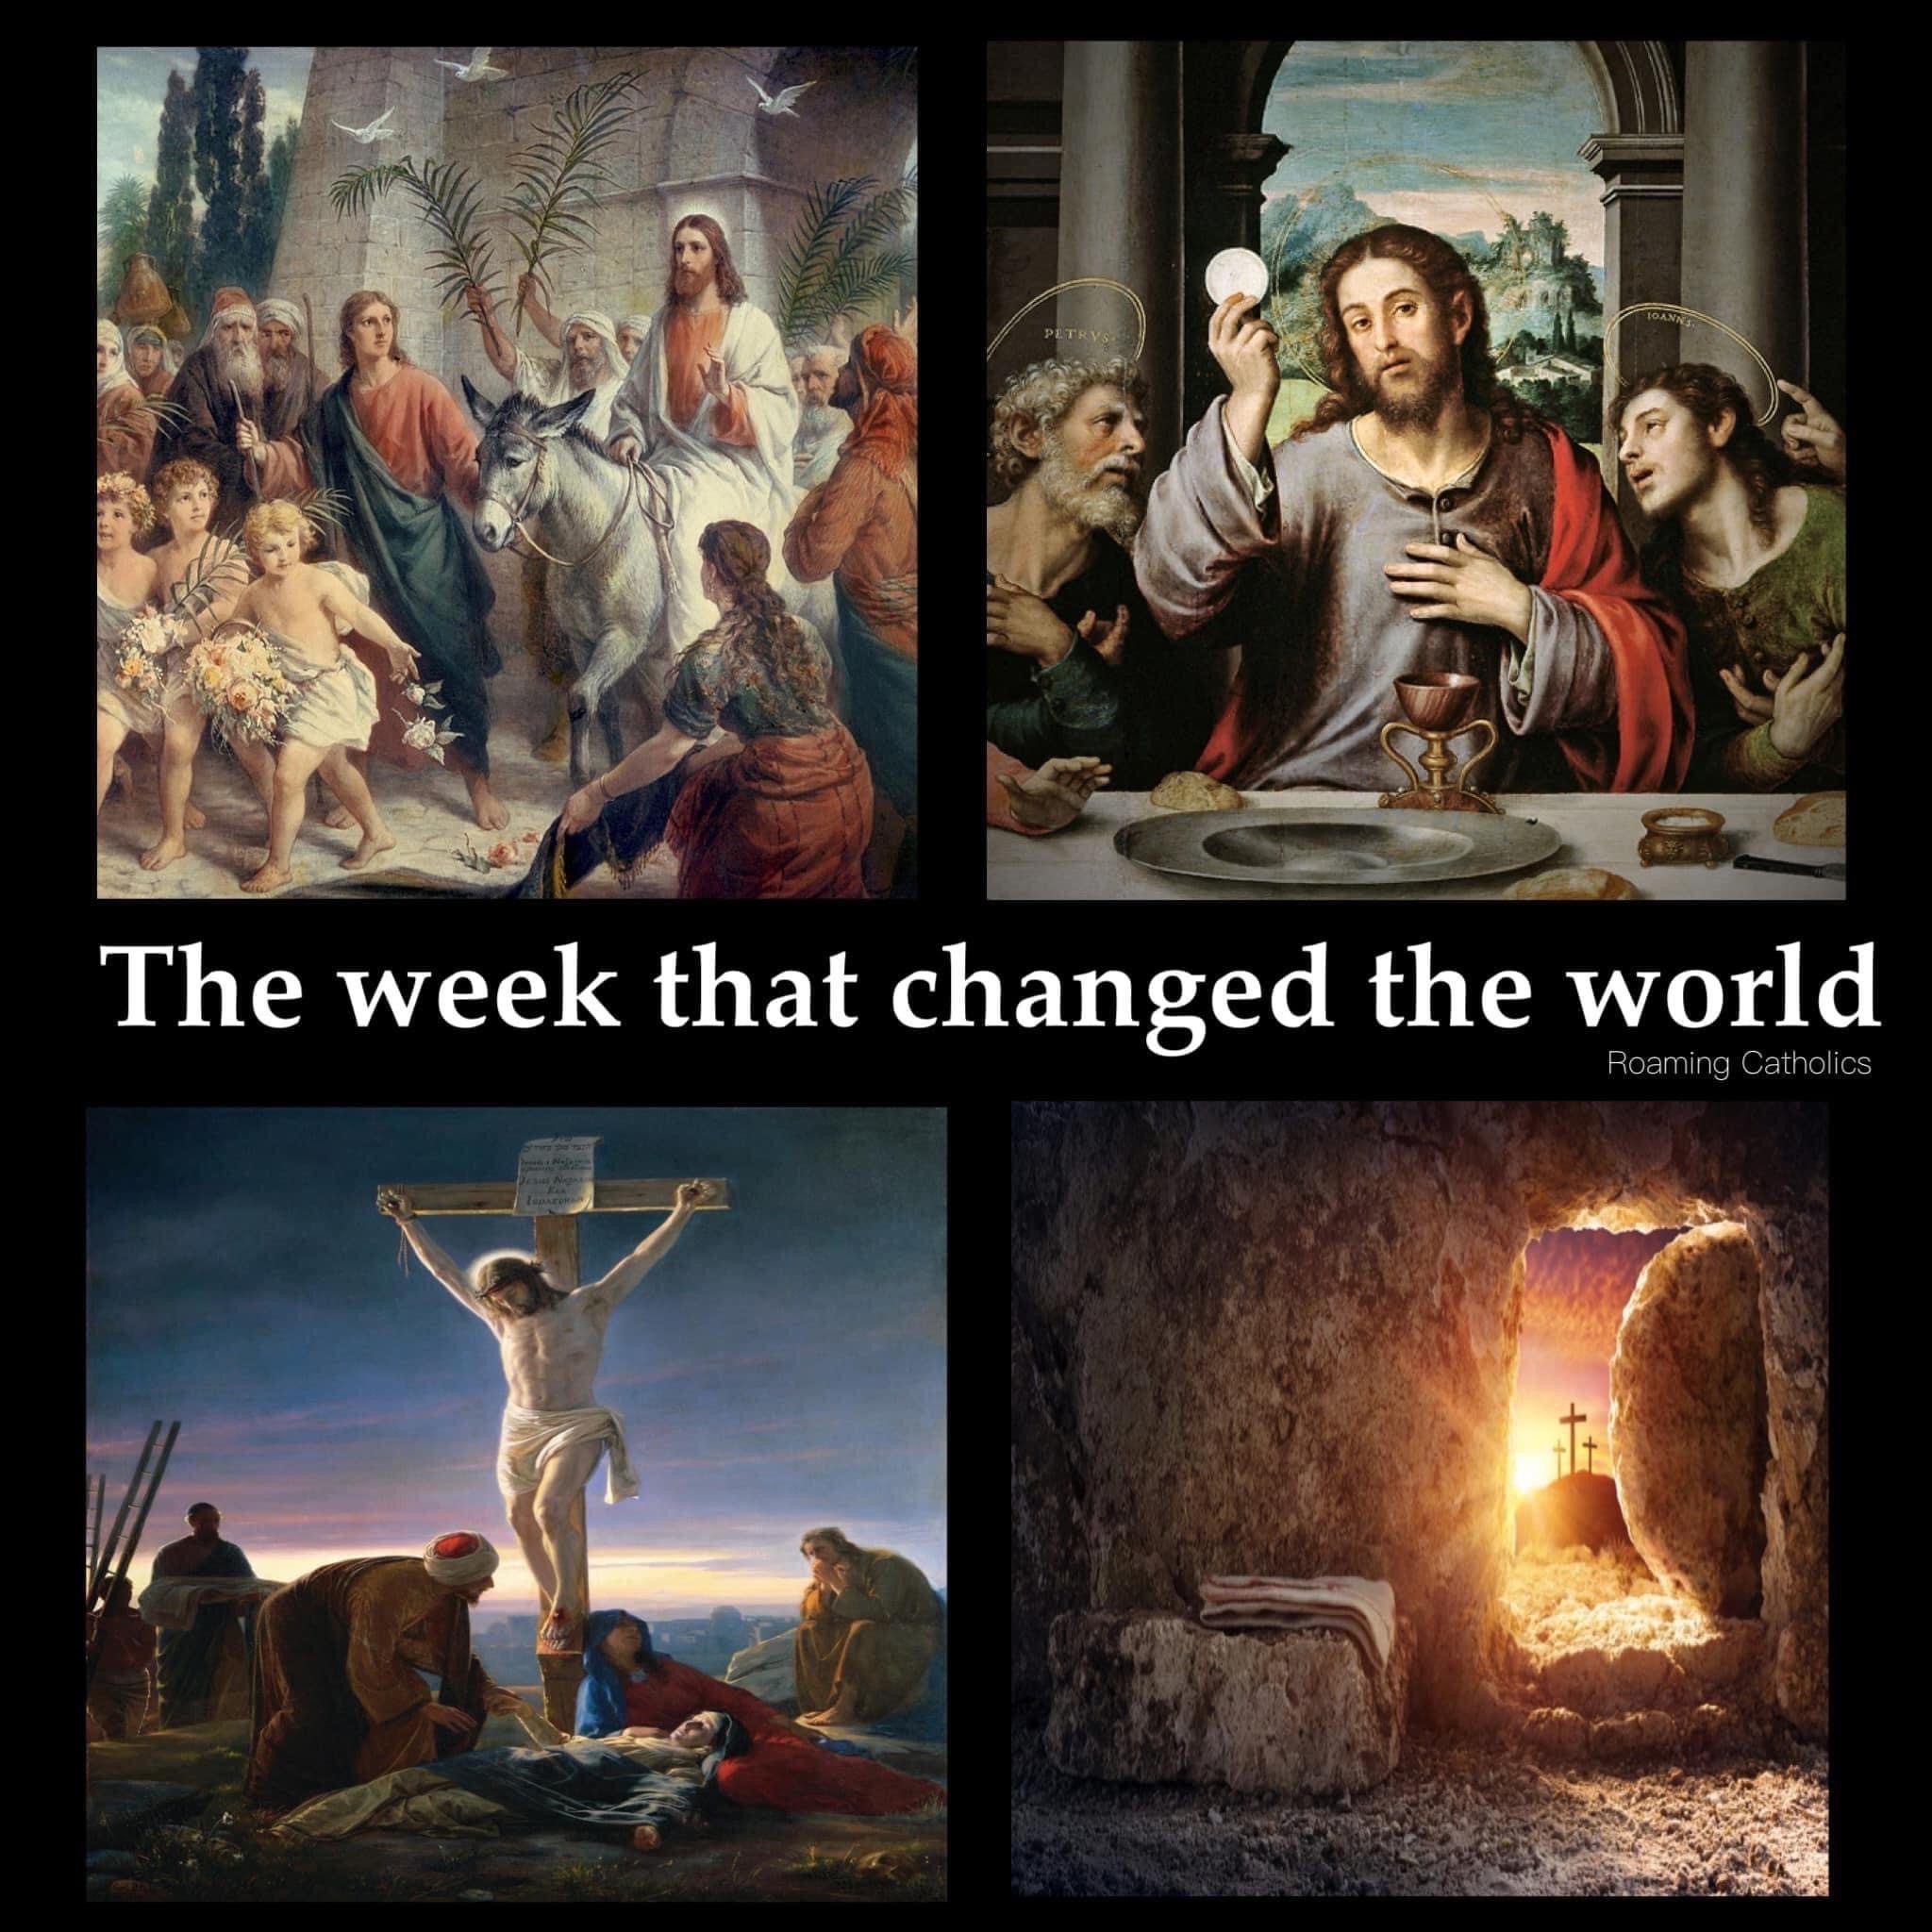 A collection of paintings showing the Passion and Resurrection of Christ